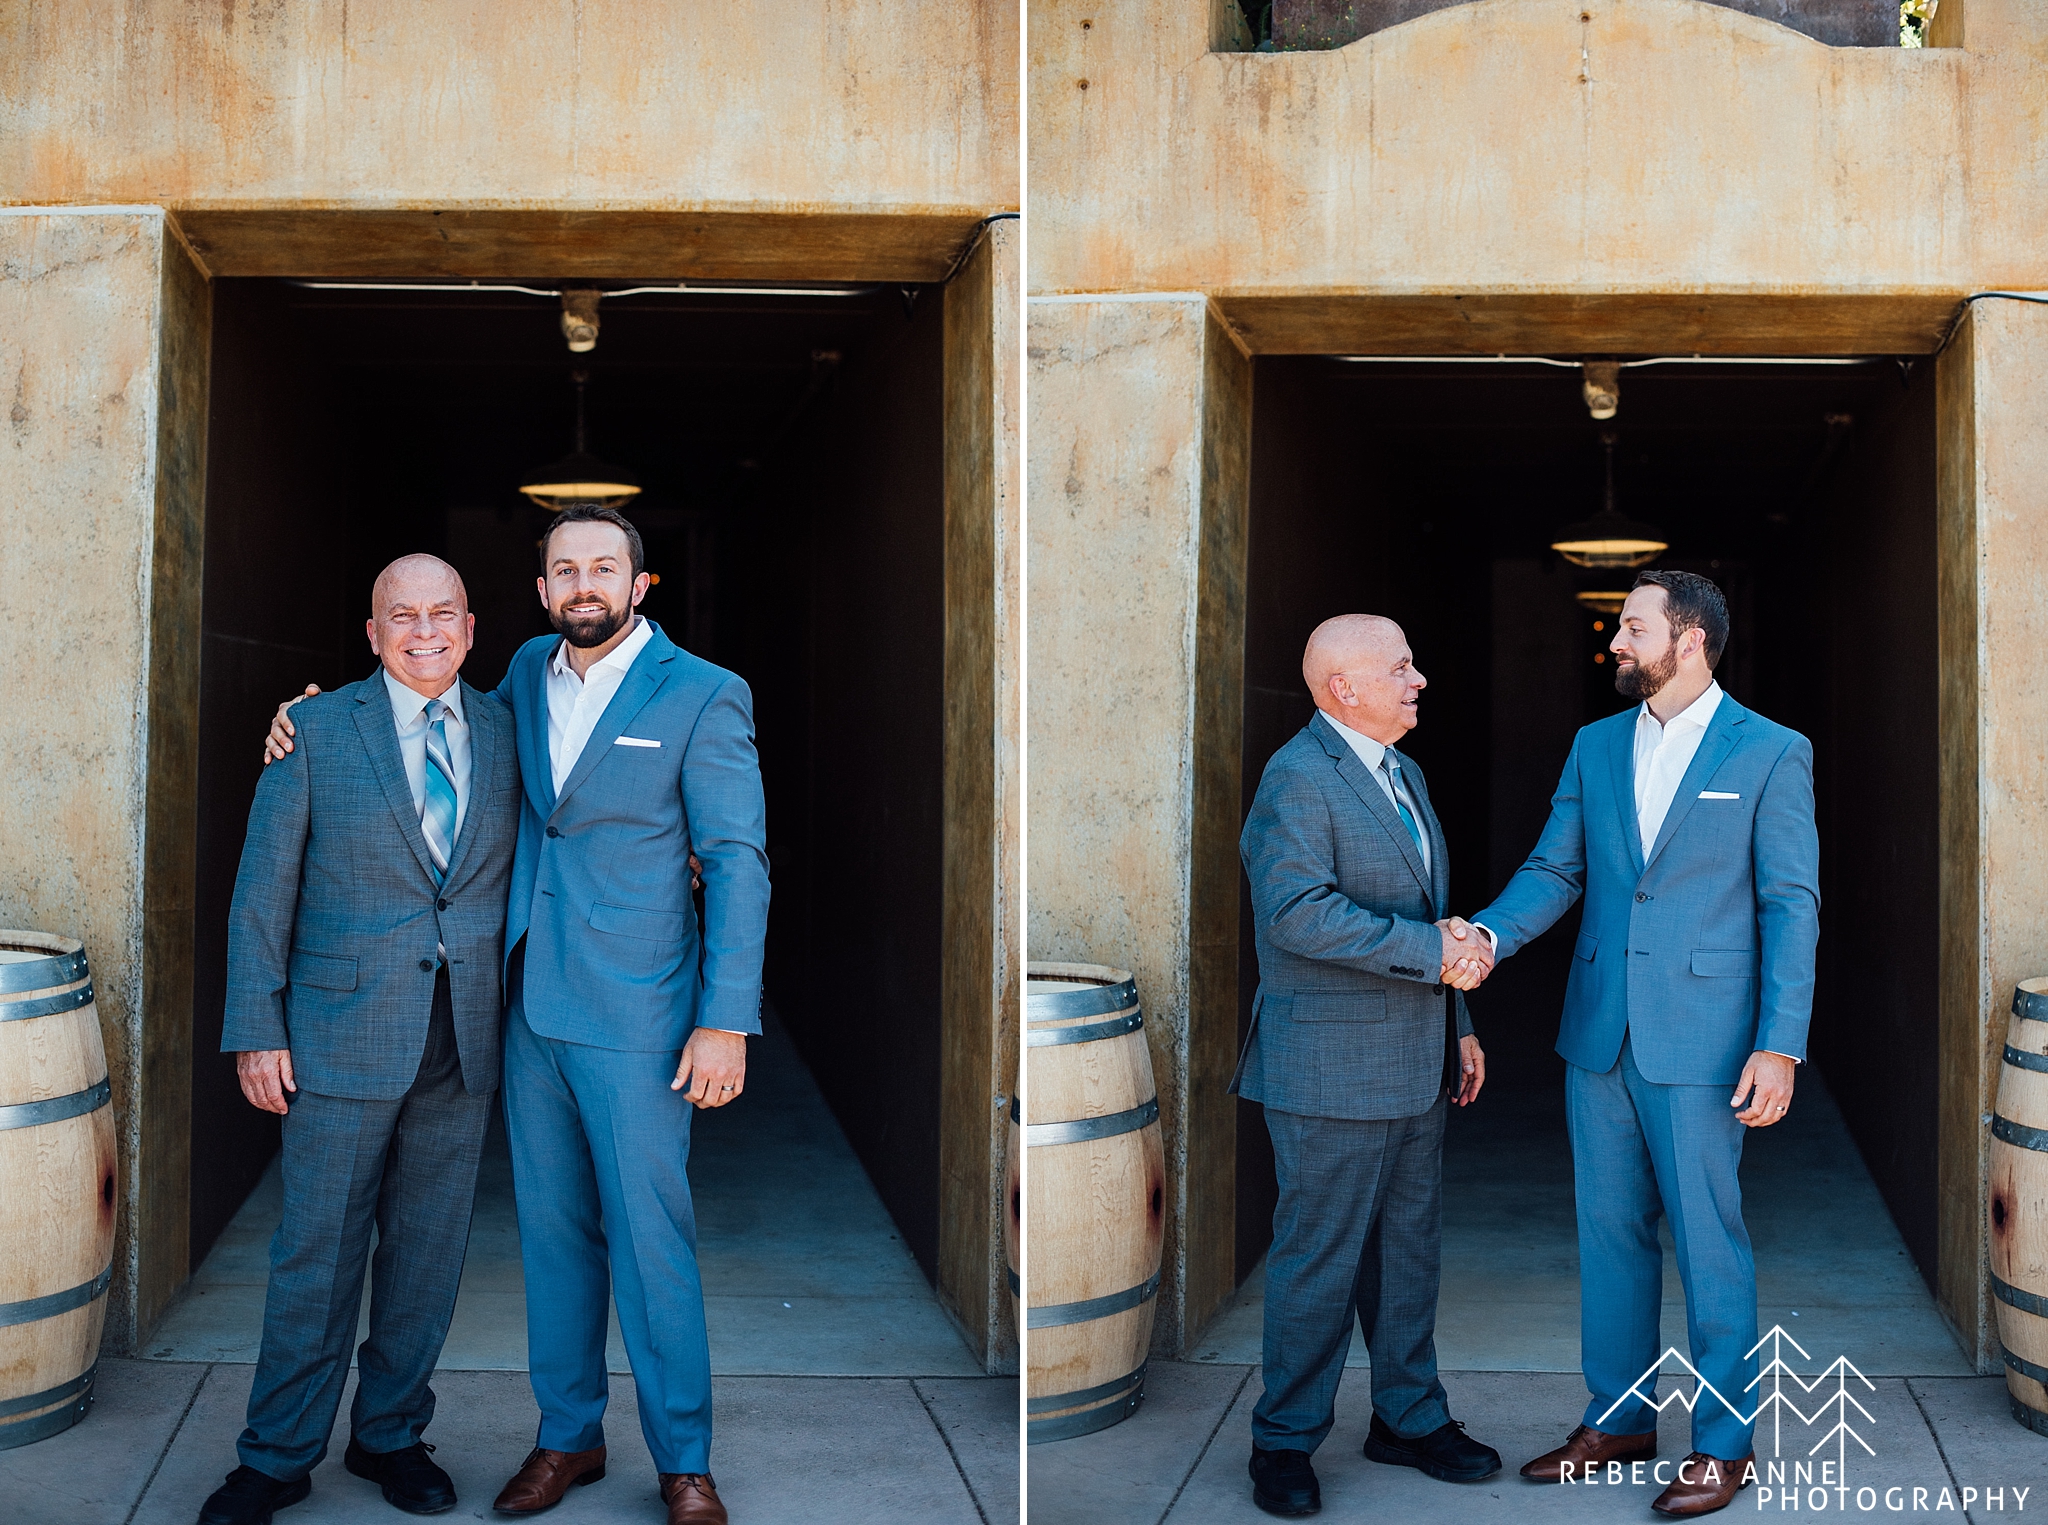 Swiftwater Cellars Elopement,Swiftwater Cellars Wedding,Swiftwater Cellars Elopement Photos,Swiftwater Cellars Wedding Photos,Seattle Elopement Photographer,Tacoma Elopement Photographer,Washington Elopement Photographer,PNW Elopement Photographer,Washigton Elopement Photos,